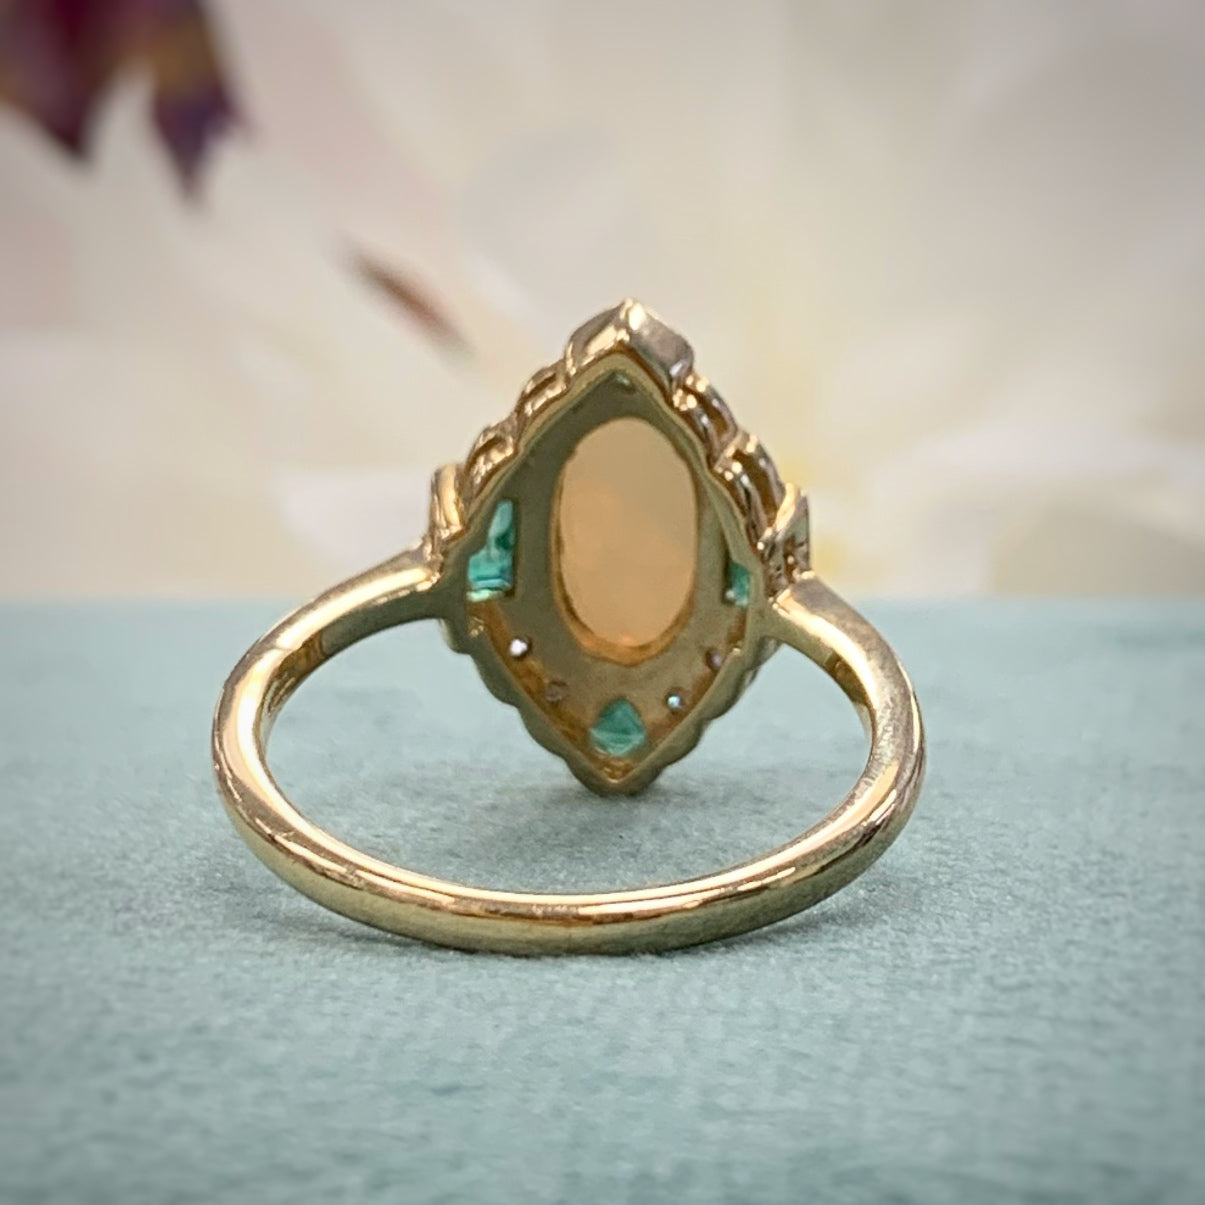 Art Deco Inspired 9ct Yellow Gold Opal Emerald And Diamond Ring - SIZE K